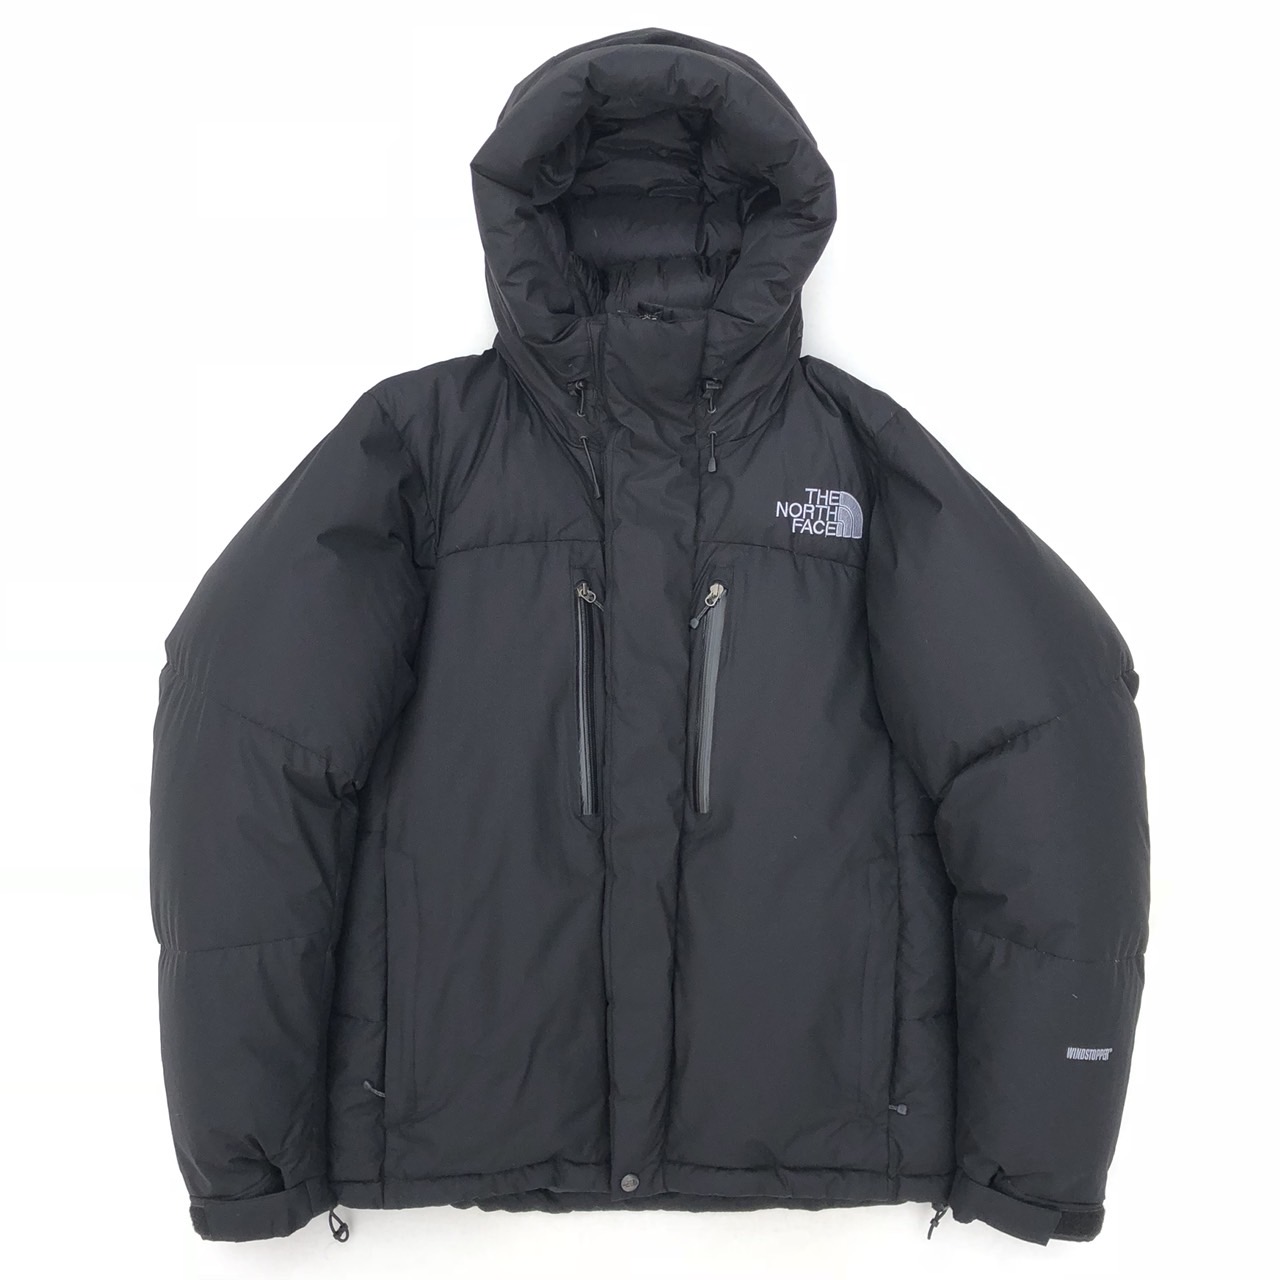 THE NORTH FACE BALTRO LIGHT DOWN JACKET - Kchup Rice